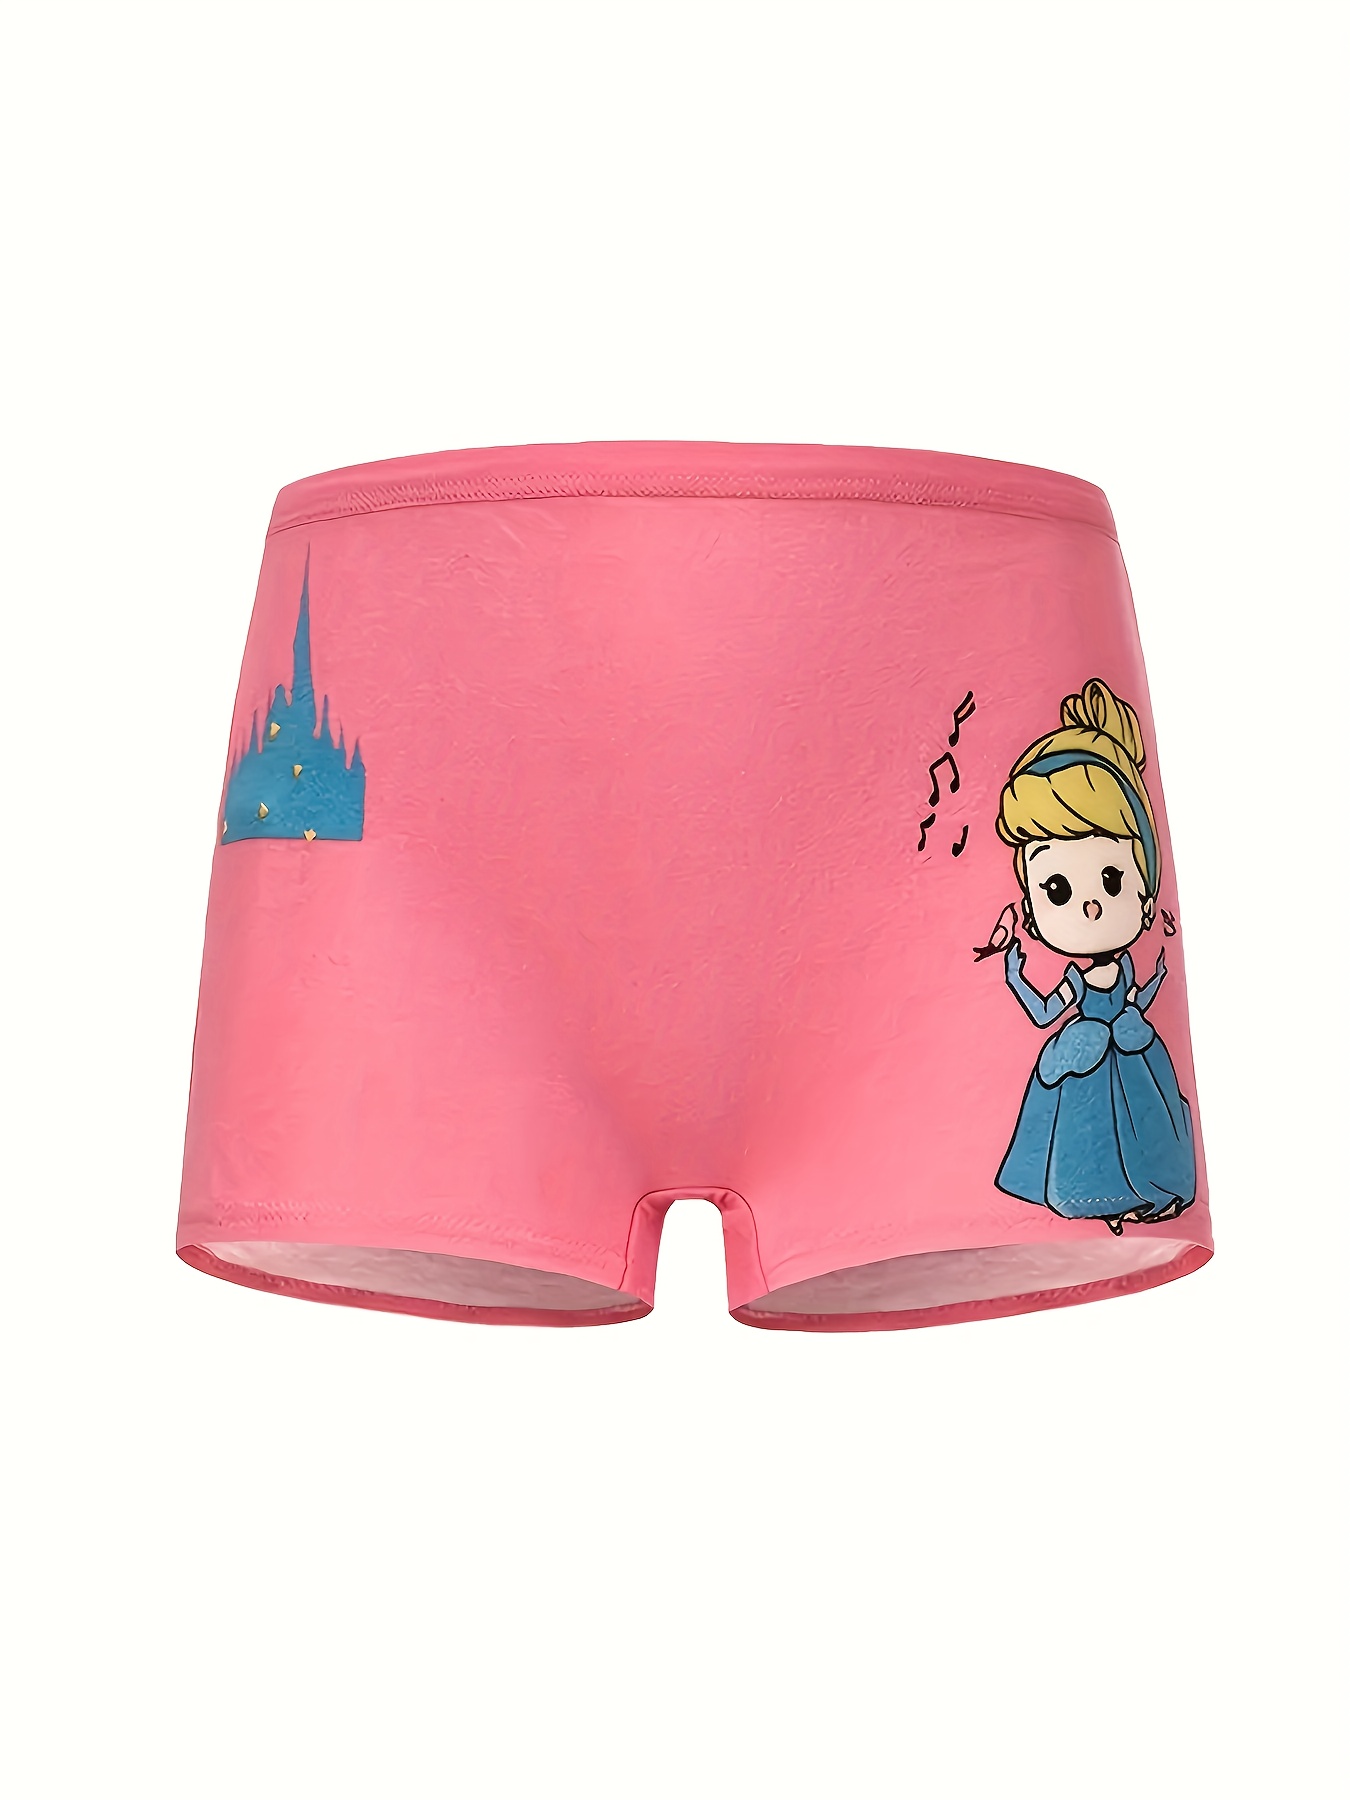 4Pcs Toddler Girls Cotton Boxers Random Cartoon Princess Print Cute  Bottoming Underwear Cotton Soft Comfy Breathable Kids Panties For All  Seasons